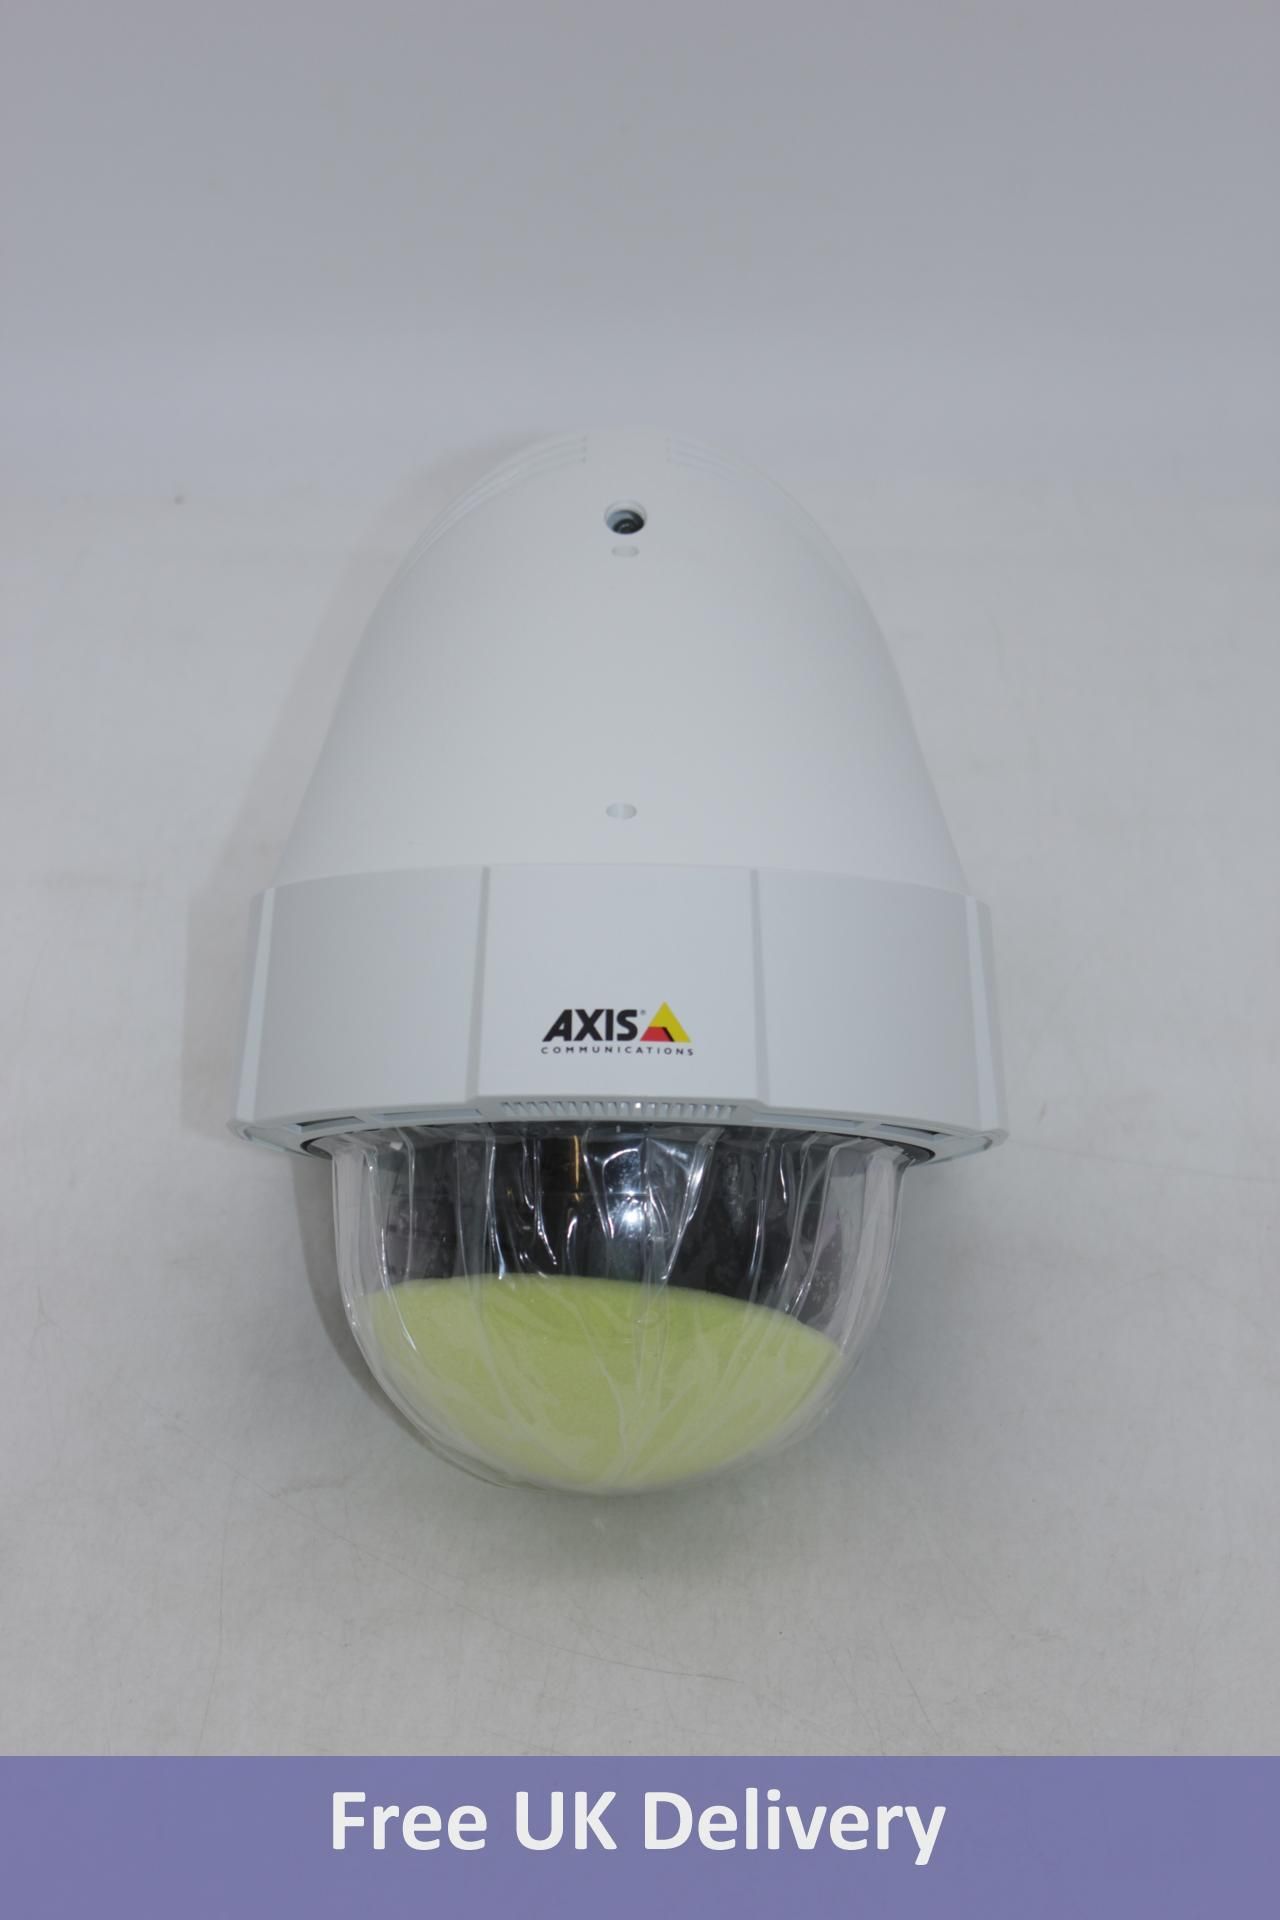 AXIS Communications P5415- 50HZ PTZ Camera Direct Drive 1080P D/N 18x Zoom, White